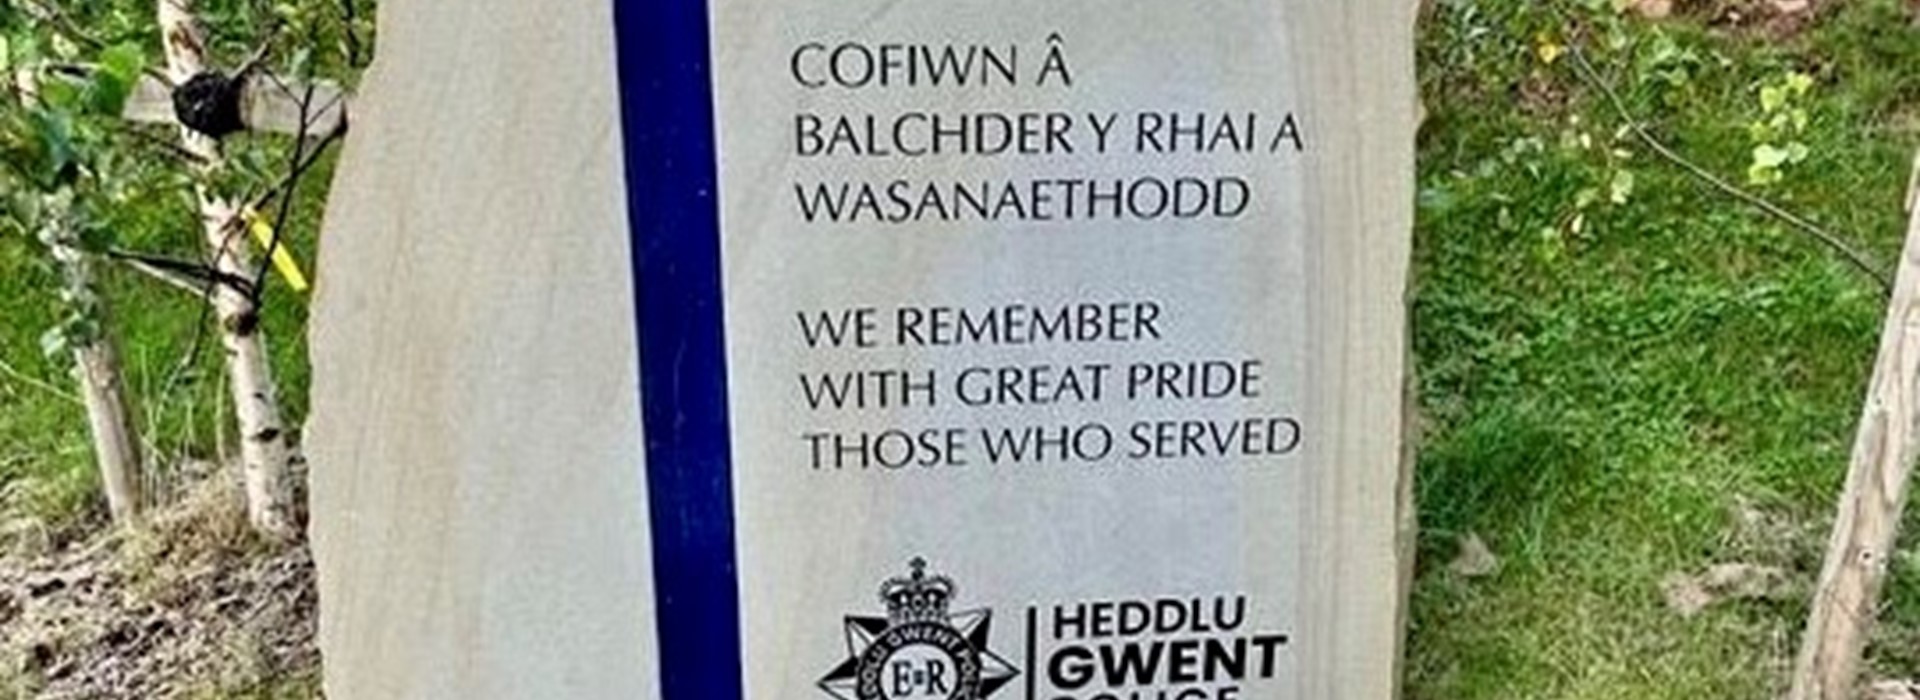 Gwent Police memorial stone